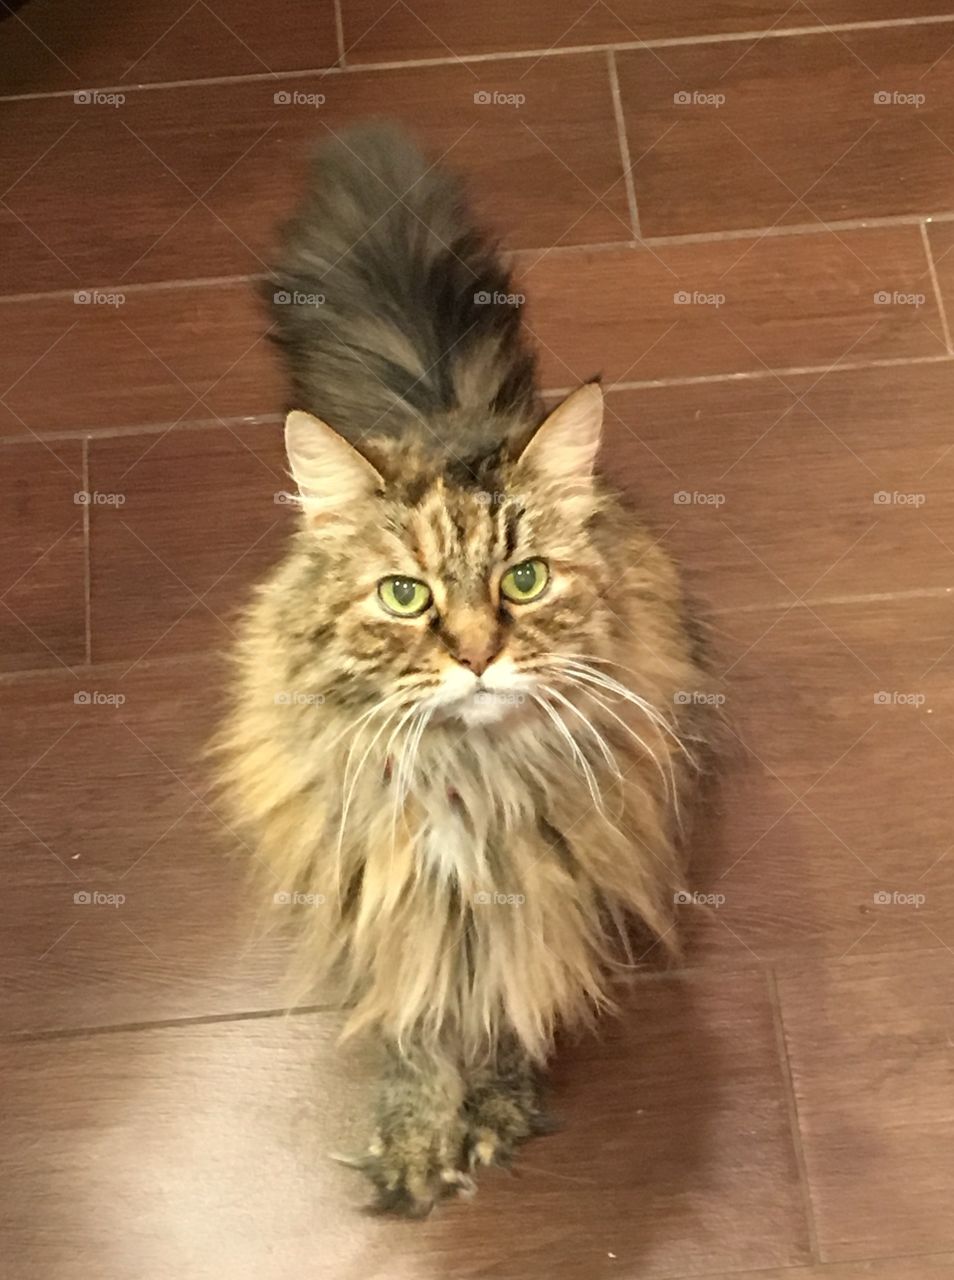 Maine Coon tortoiseshell cat. Shaggy is s senior cat - approximately 17 years old.